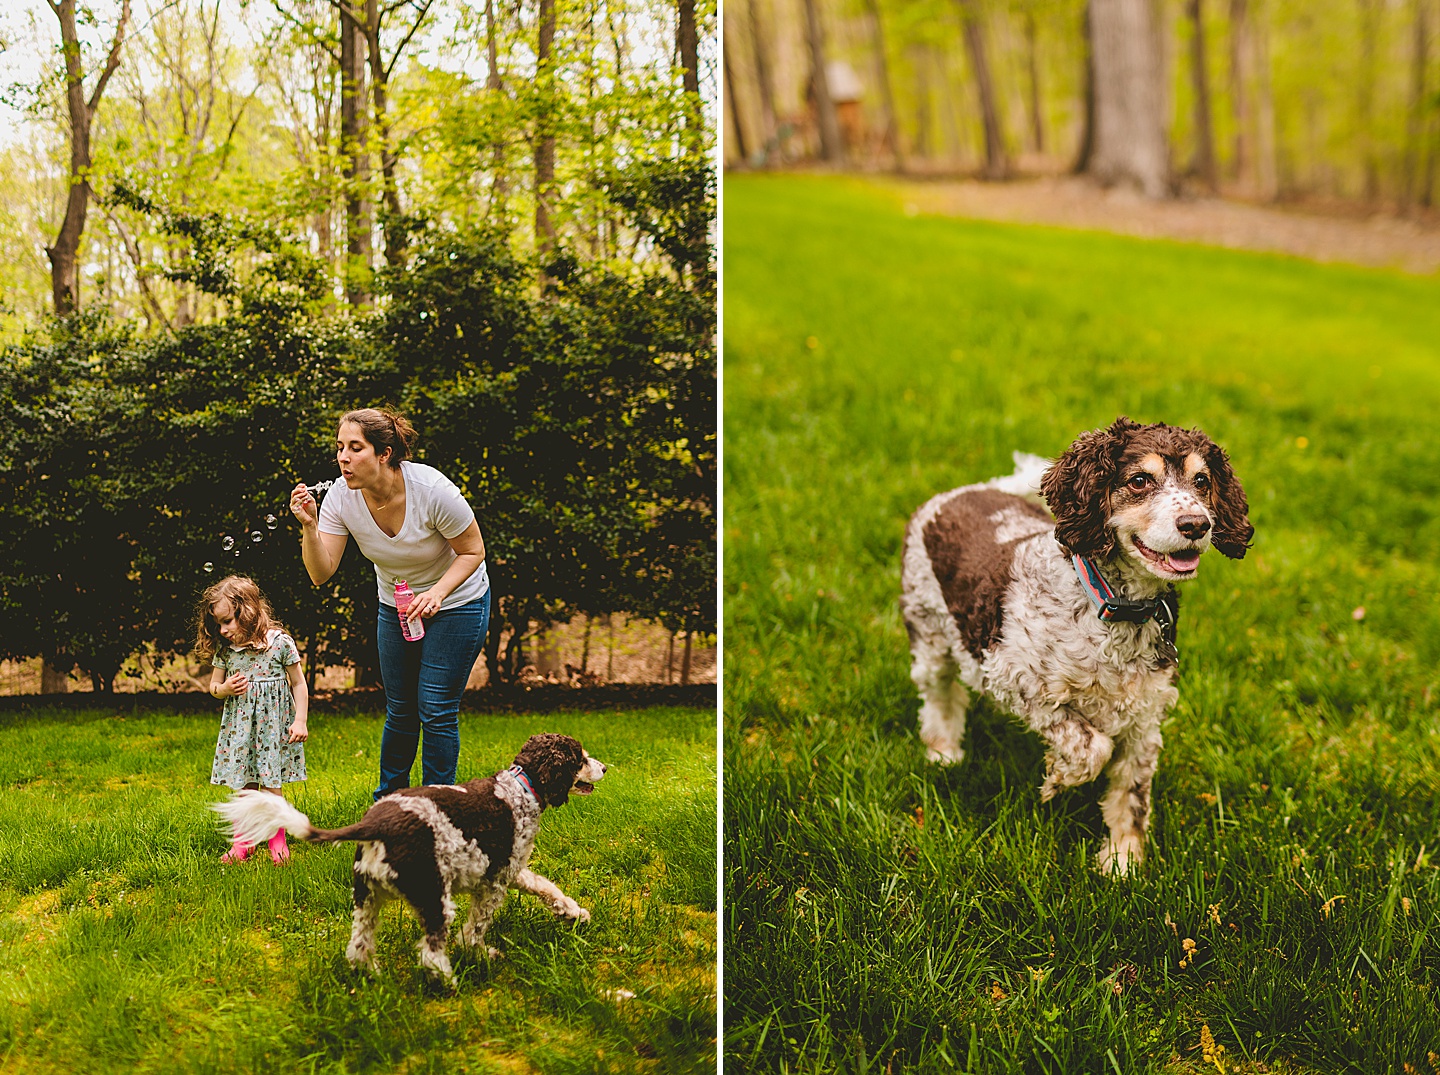 Mom blowing bubbles for daughter and portrait of dog